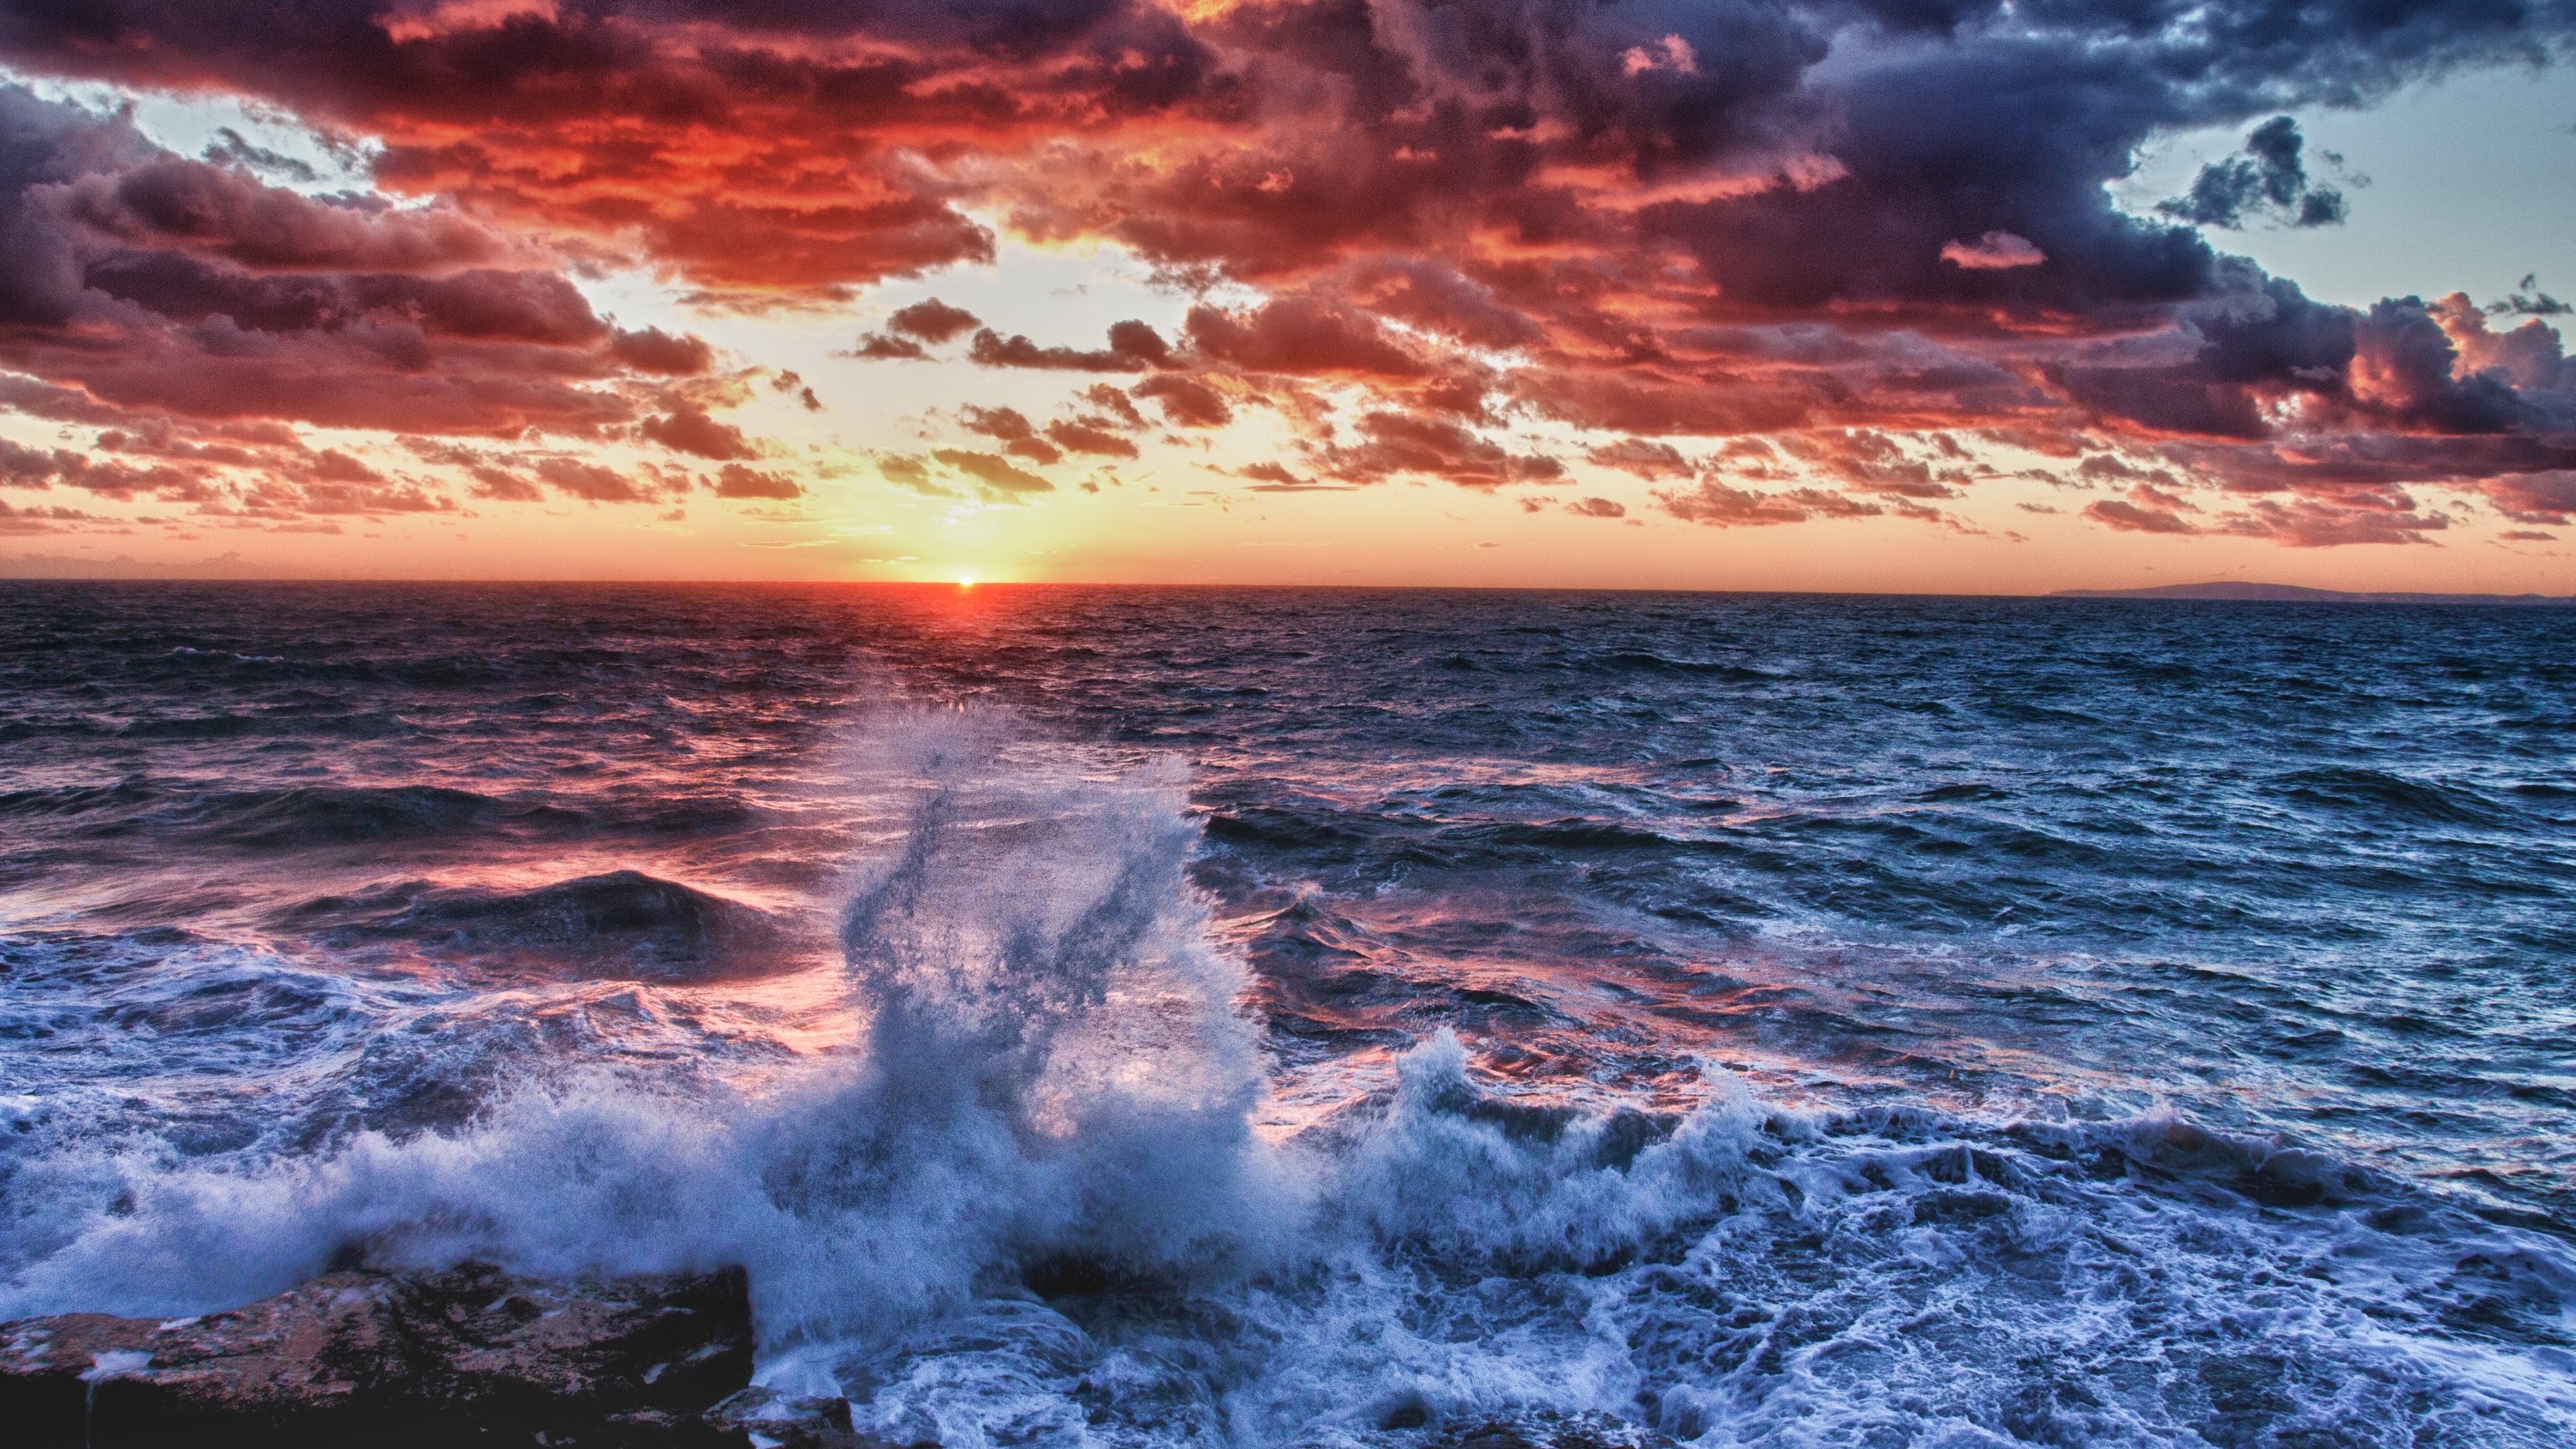 General 3840x2160 nature sea water waves HDR sunset clouds sky horizon sunlight